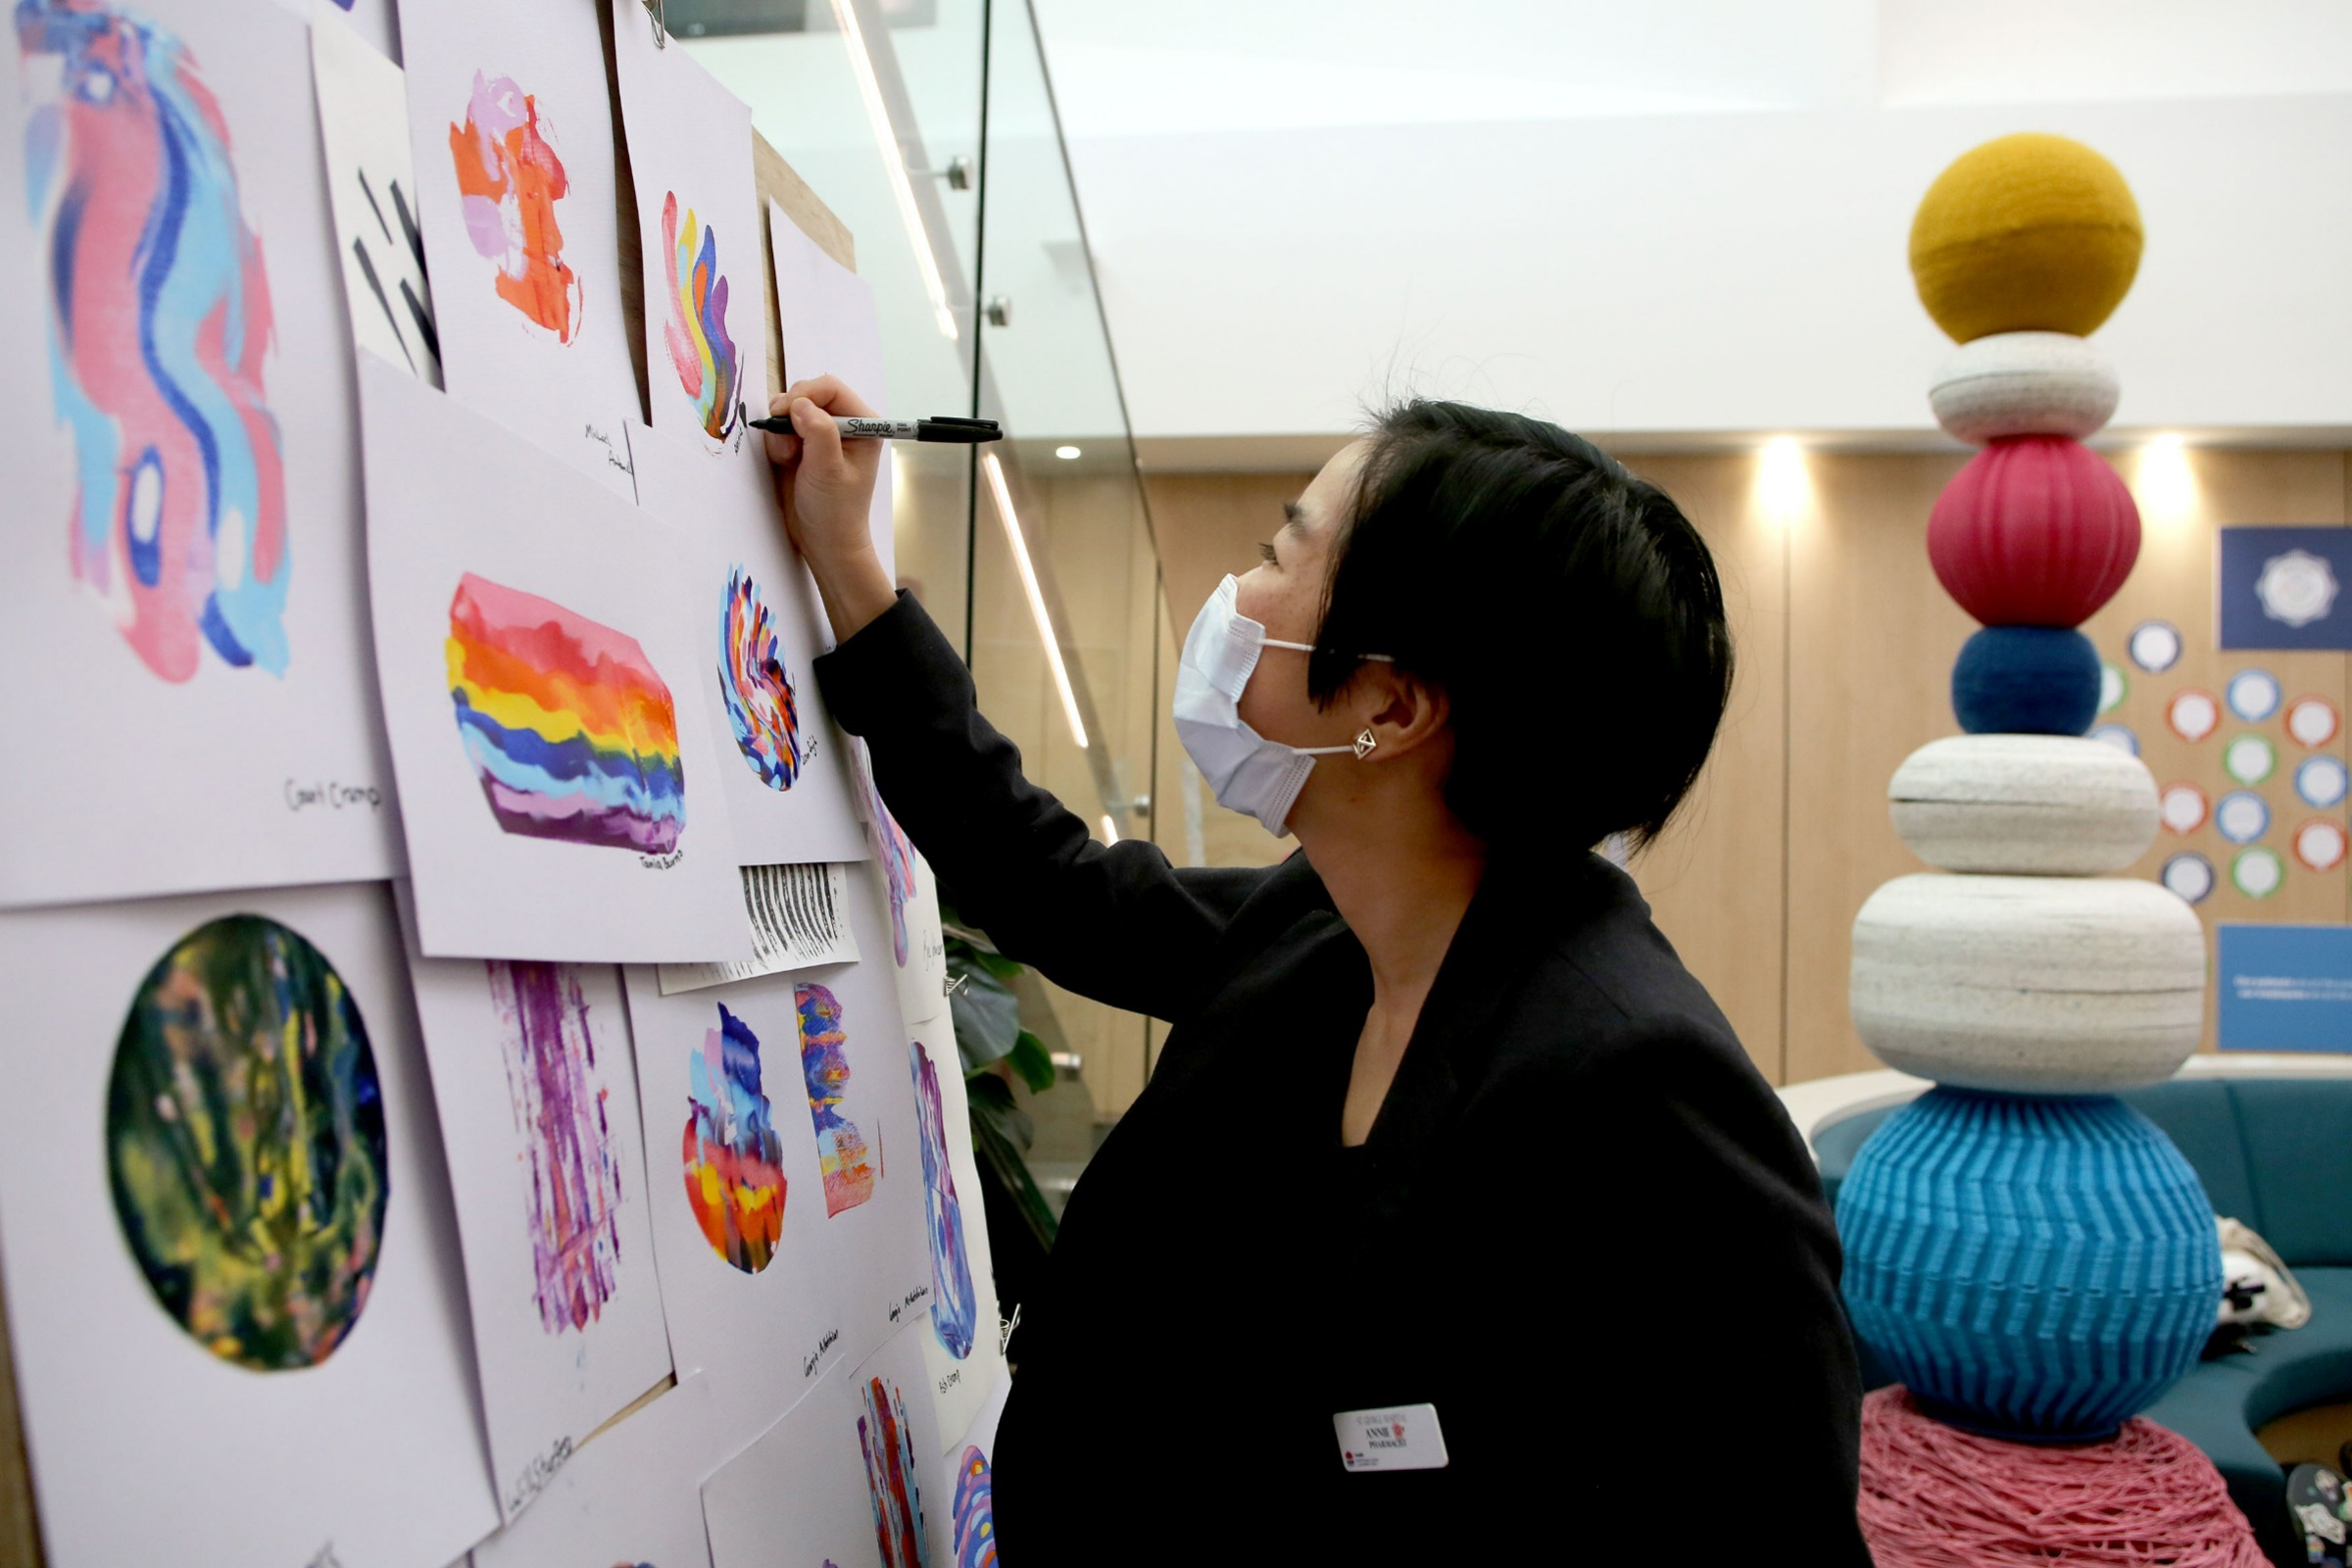 Staff member signs an artwork on the wall as part of the Festival of Care